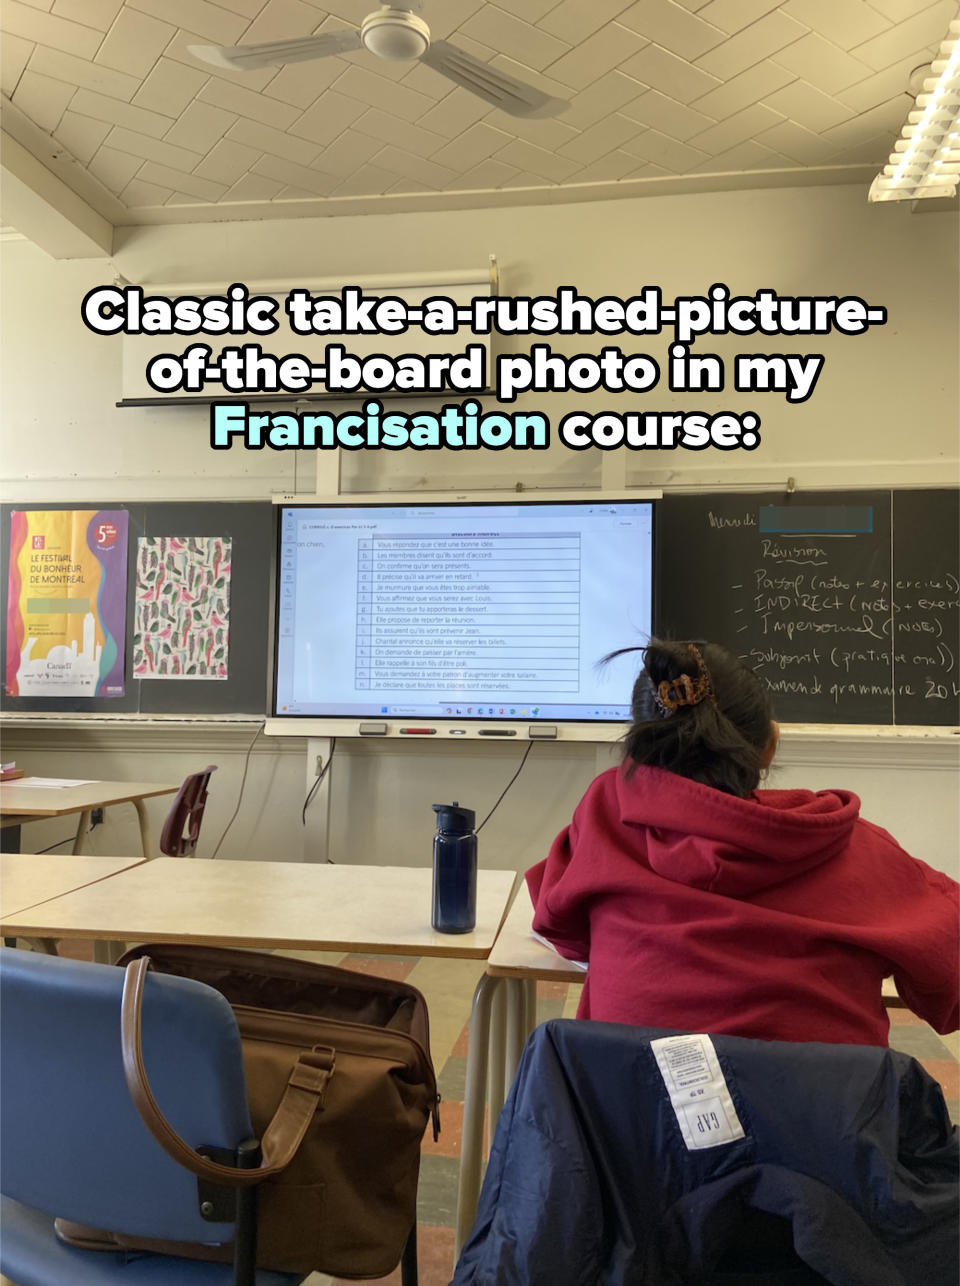 Person in a red hoodie and black hair bun sits in a classroom facing a whiteboard with a projected presentation